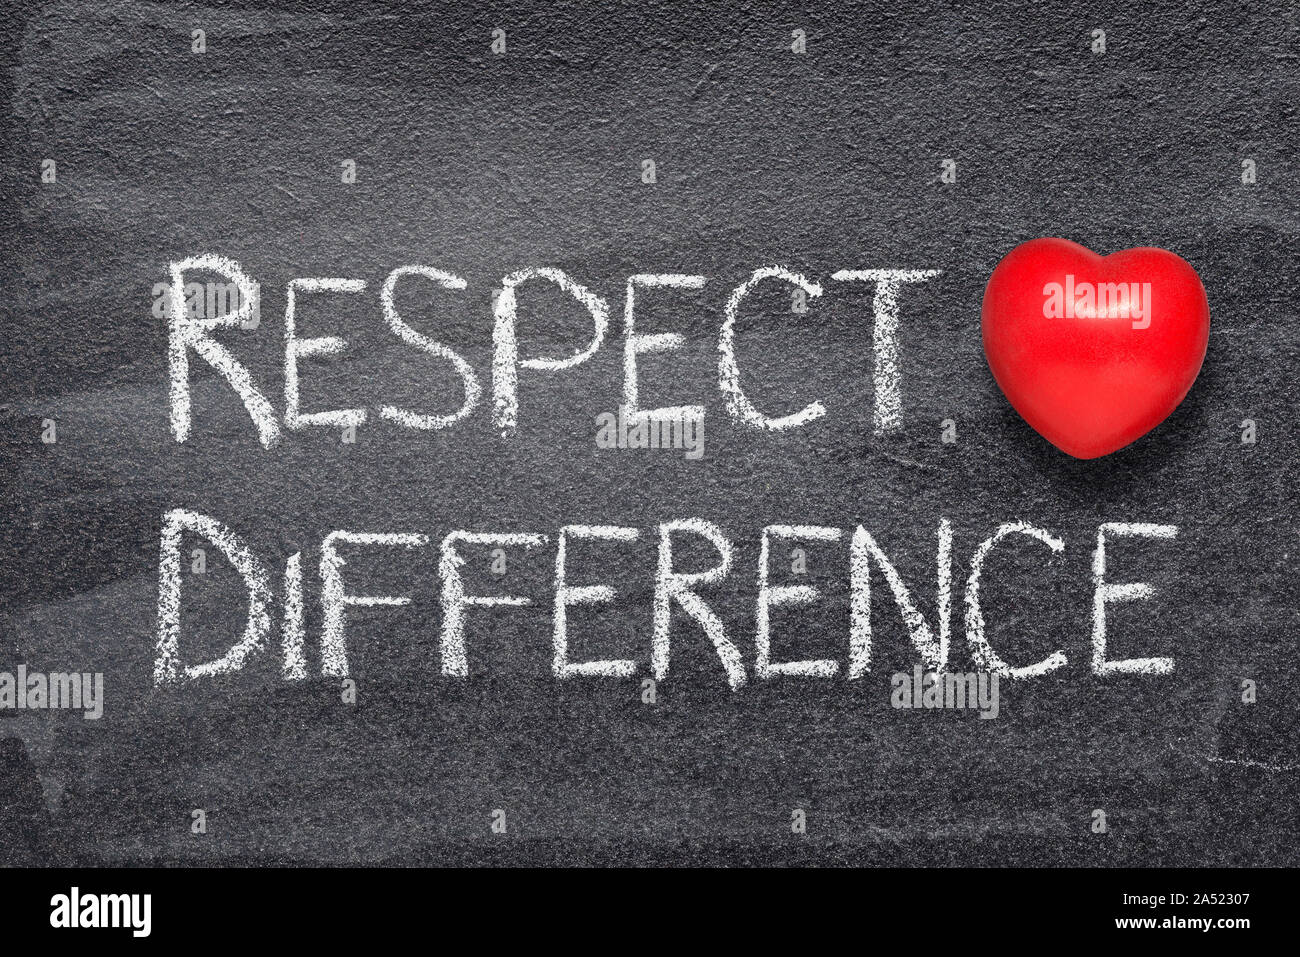 respect difference phrase written on chalkboard with red heart symbol Stock Photo